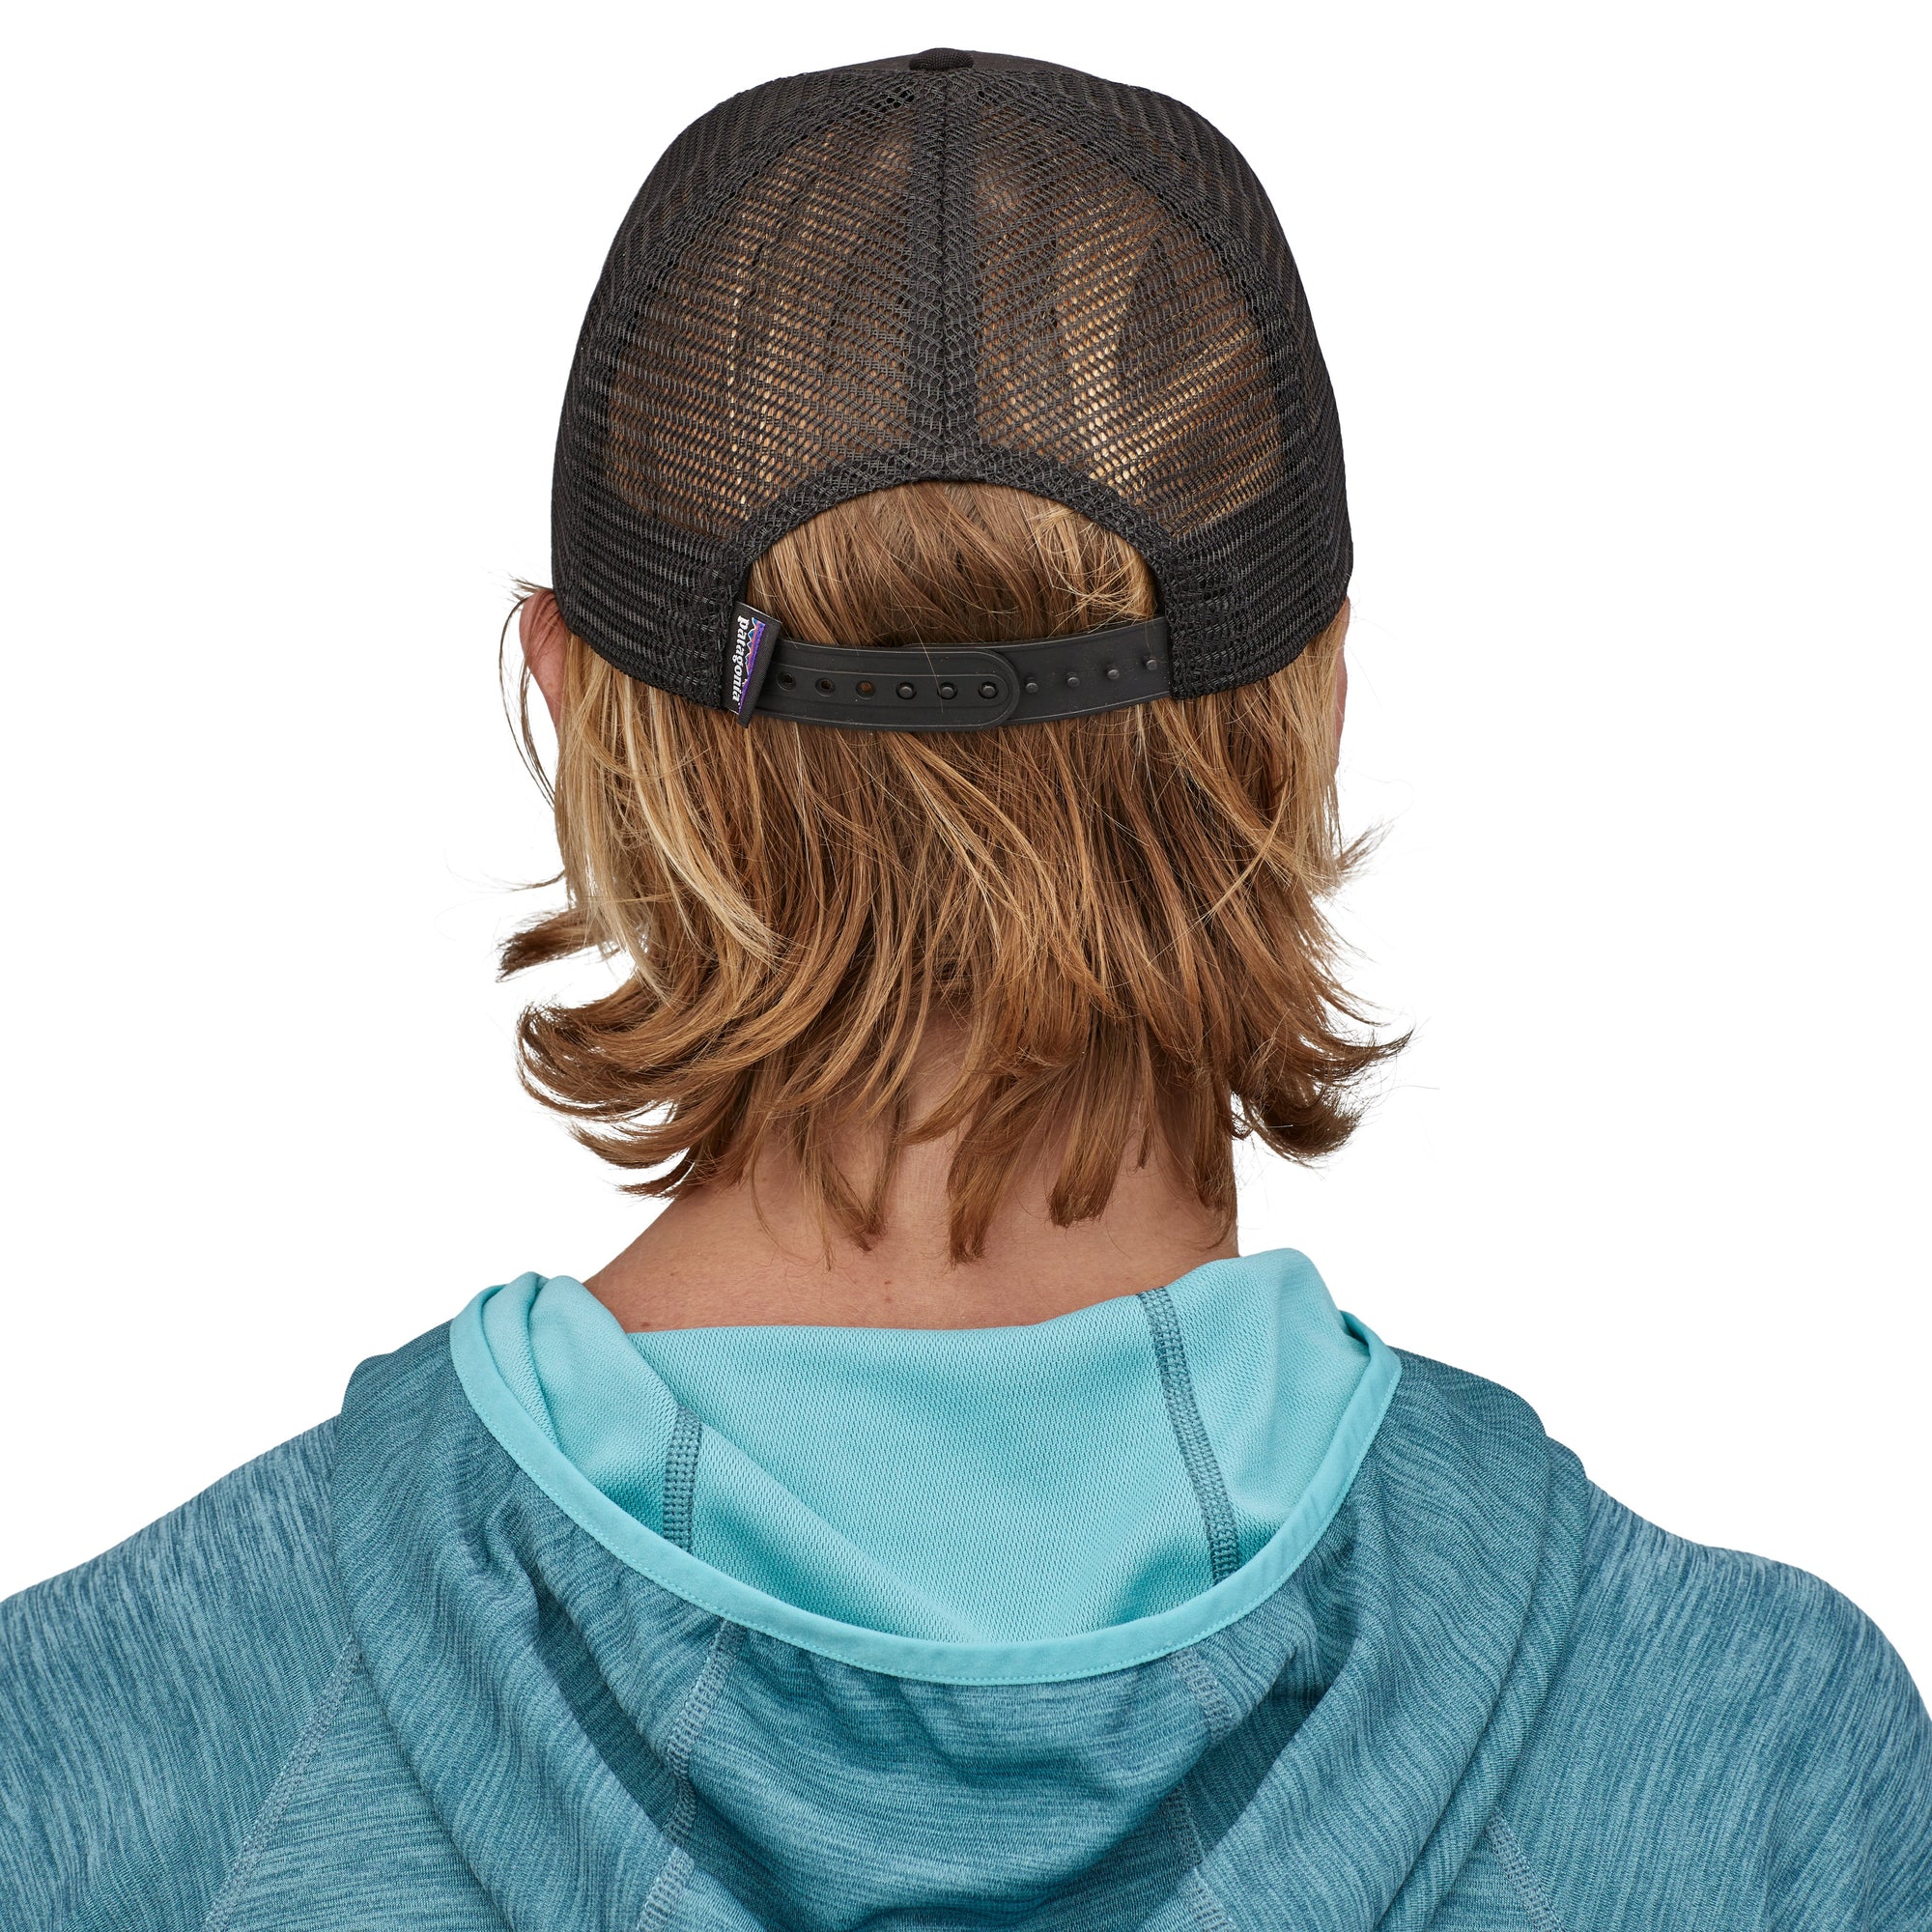 Men's Fly Fishing Hats, Gloves & Accessories by Patagonia